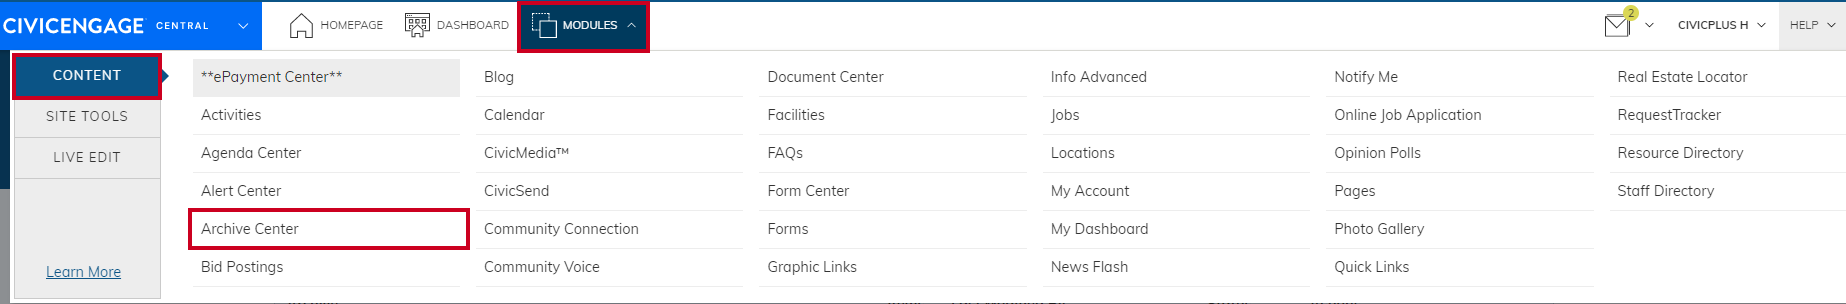 Navigate from Modules to Content then to Archive Center